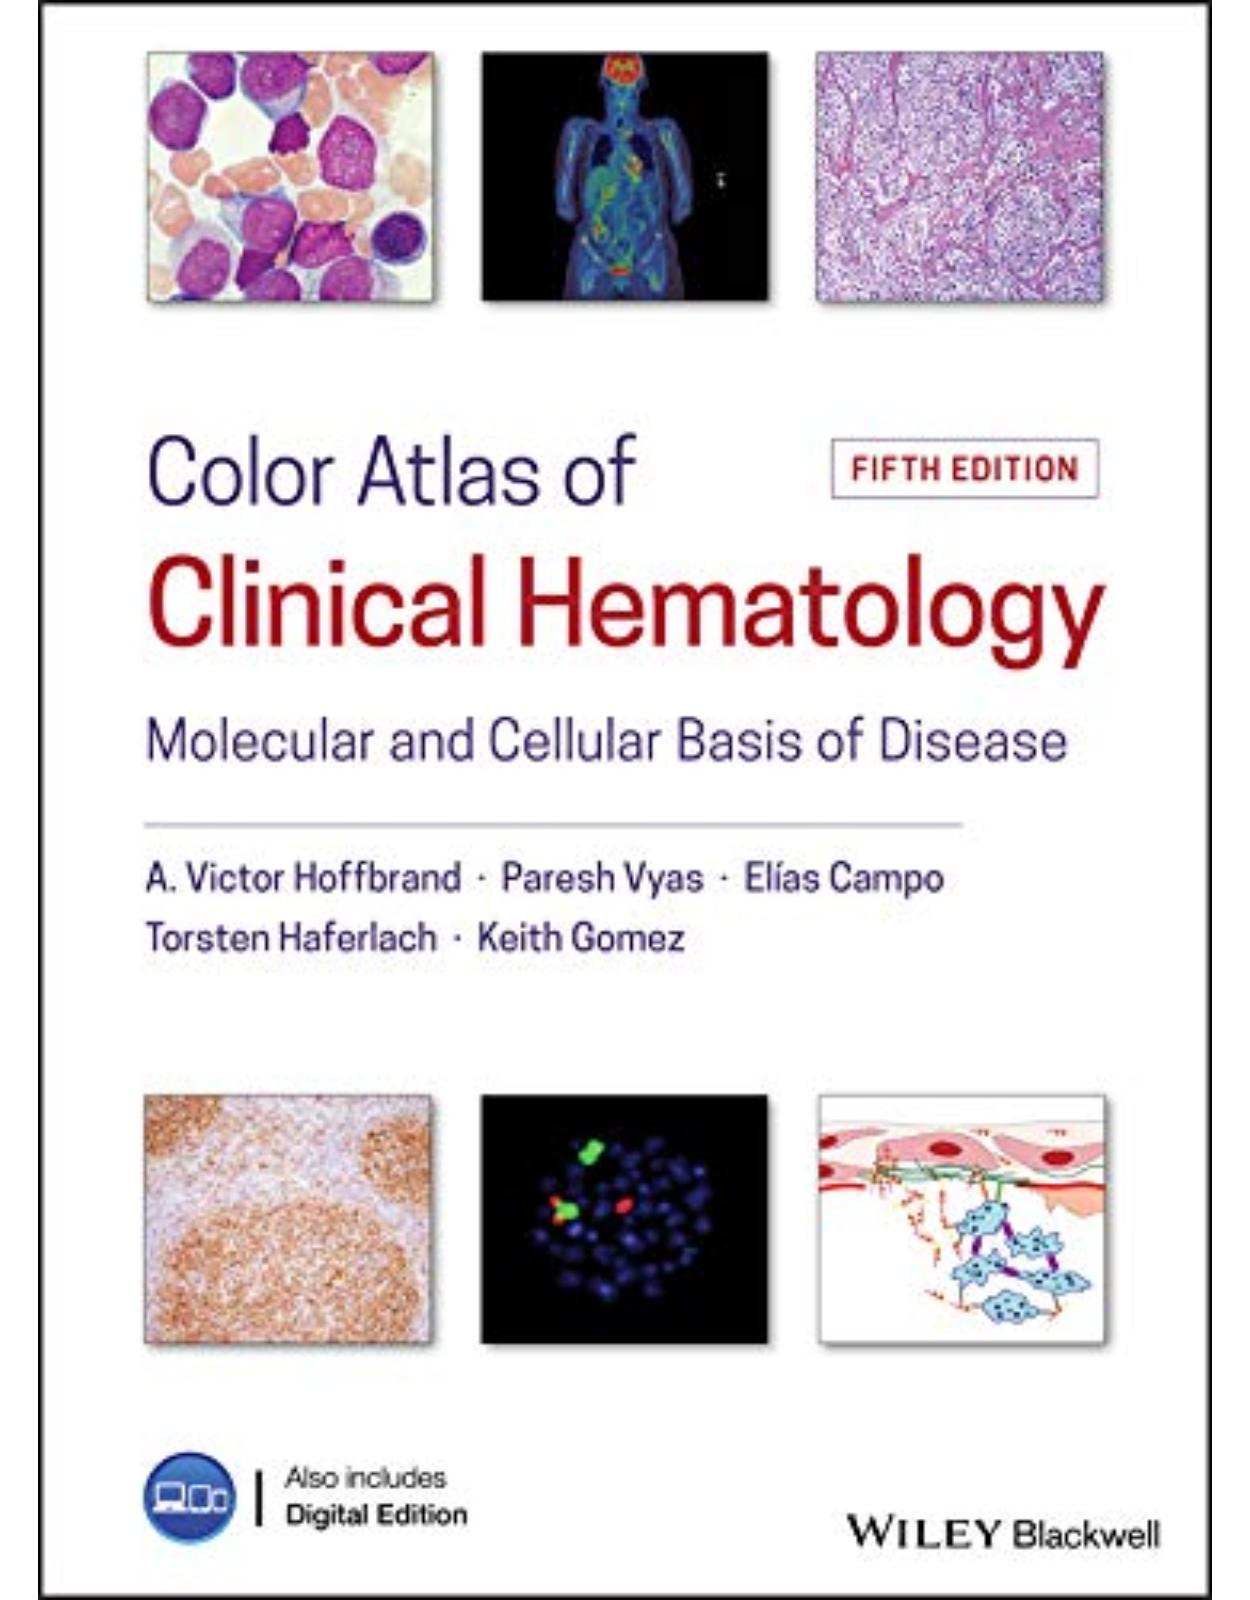 Color Atlas of Clinical Hematology: Molecular and Cellular Basis of Disease 